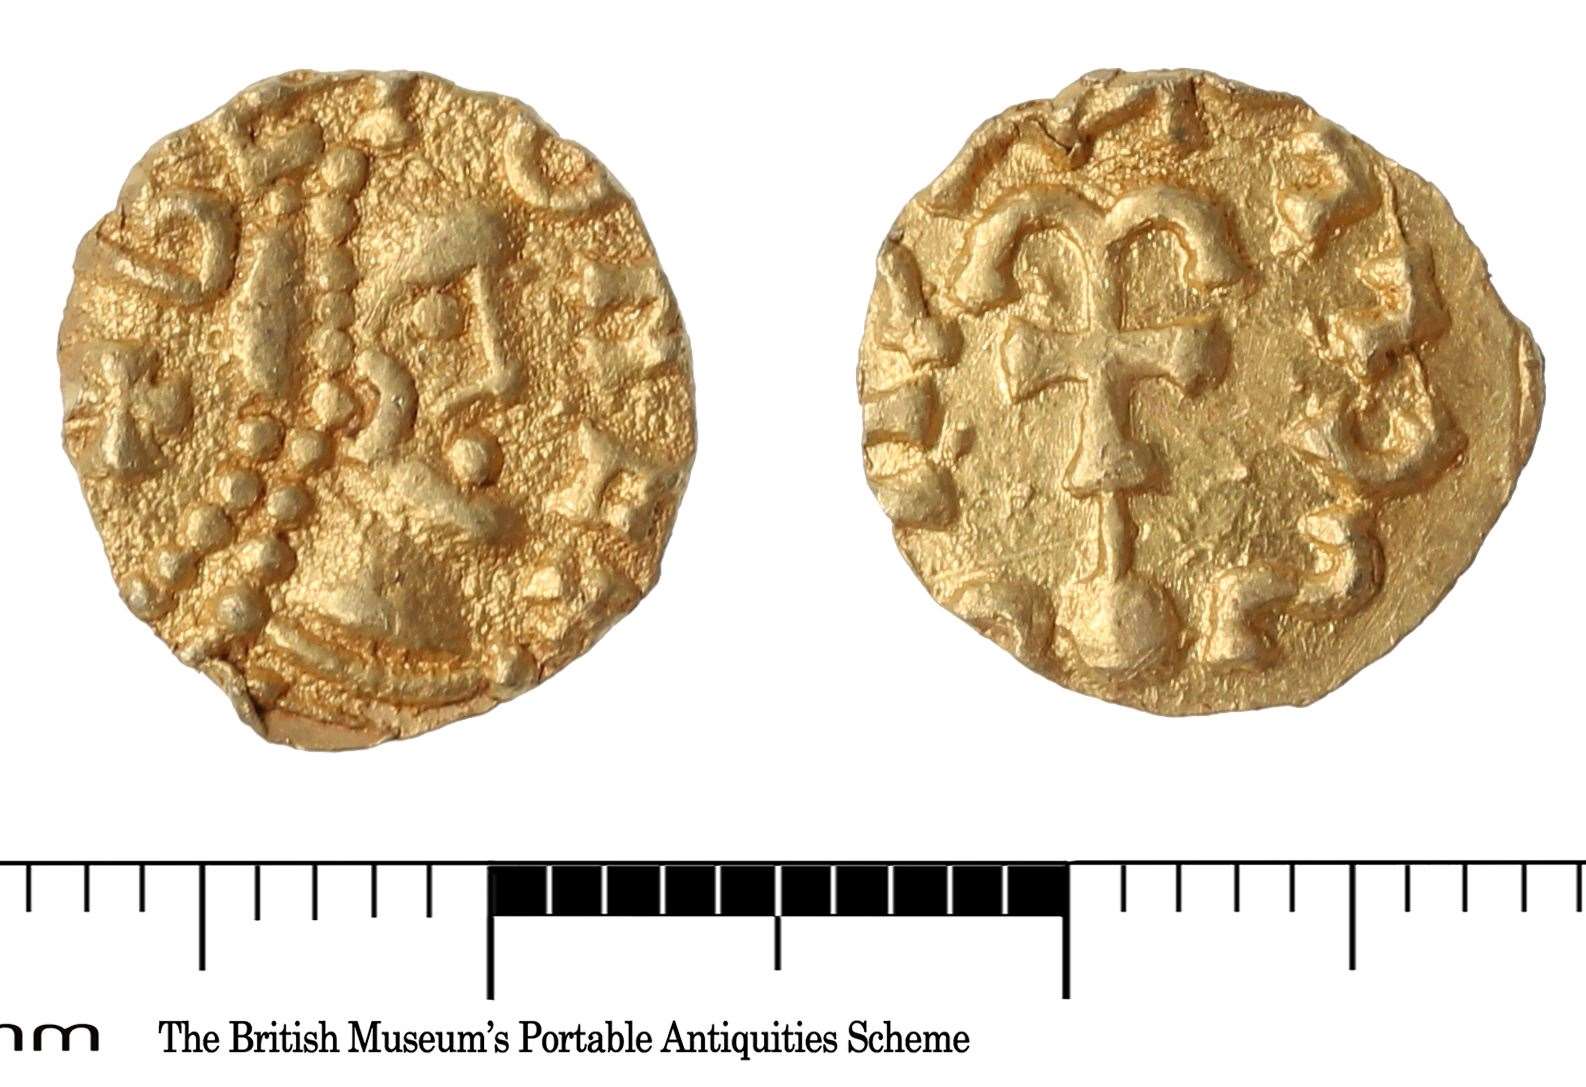 Ancient gold from secret site near East Peckham could be worth more than £10,000, but lead weights are real 'treasure'